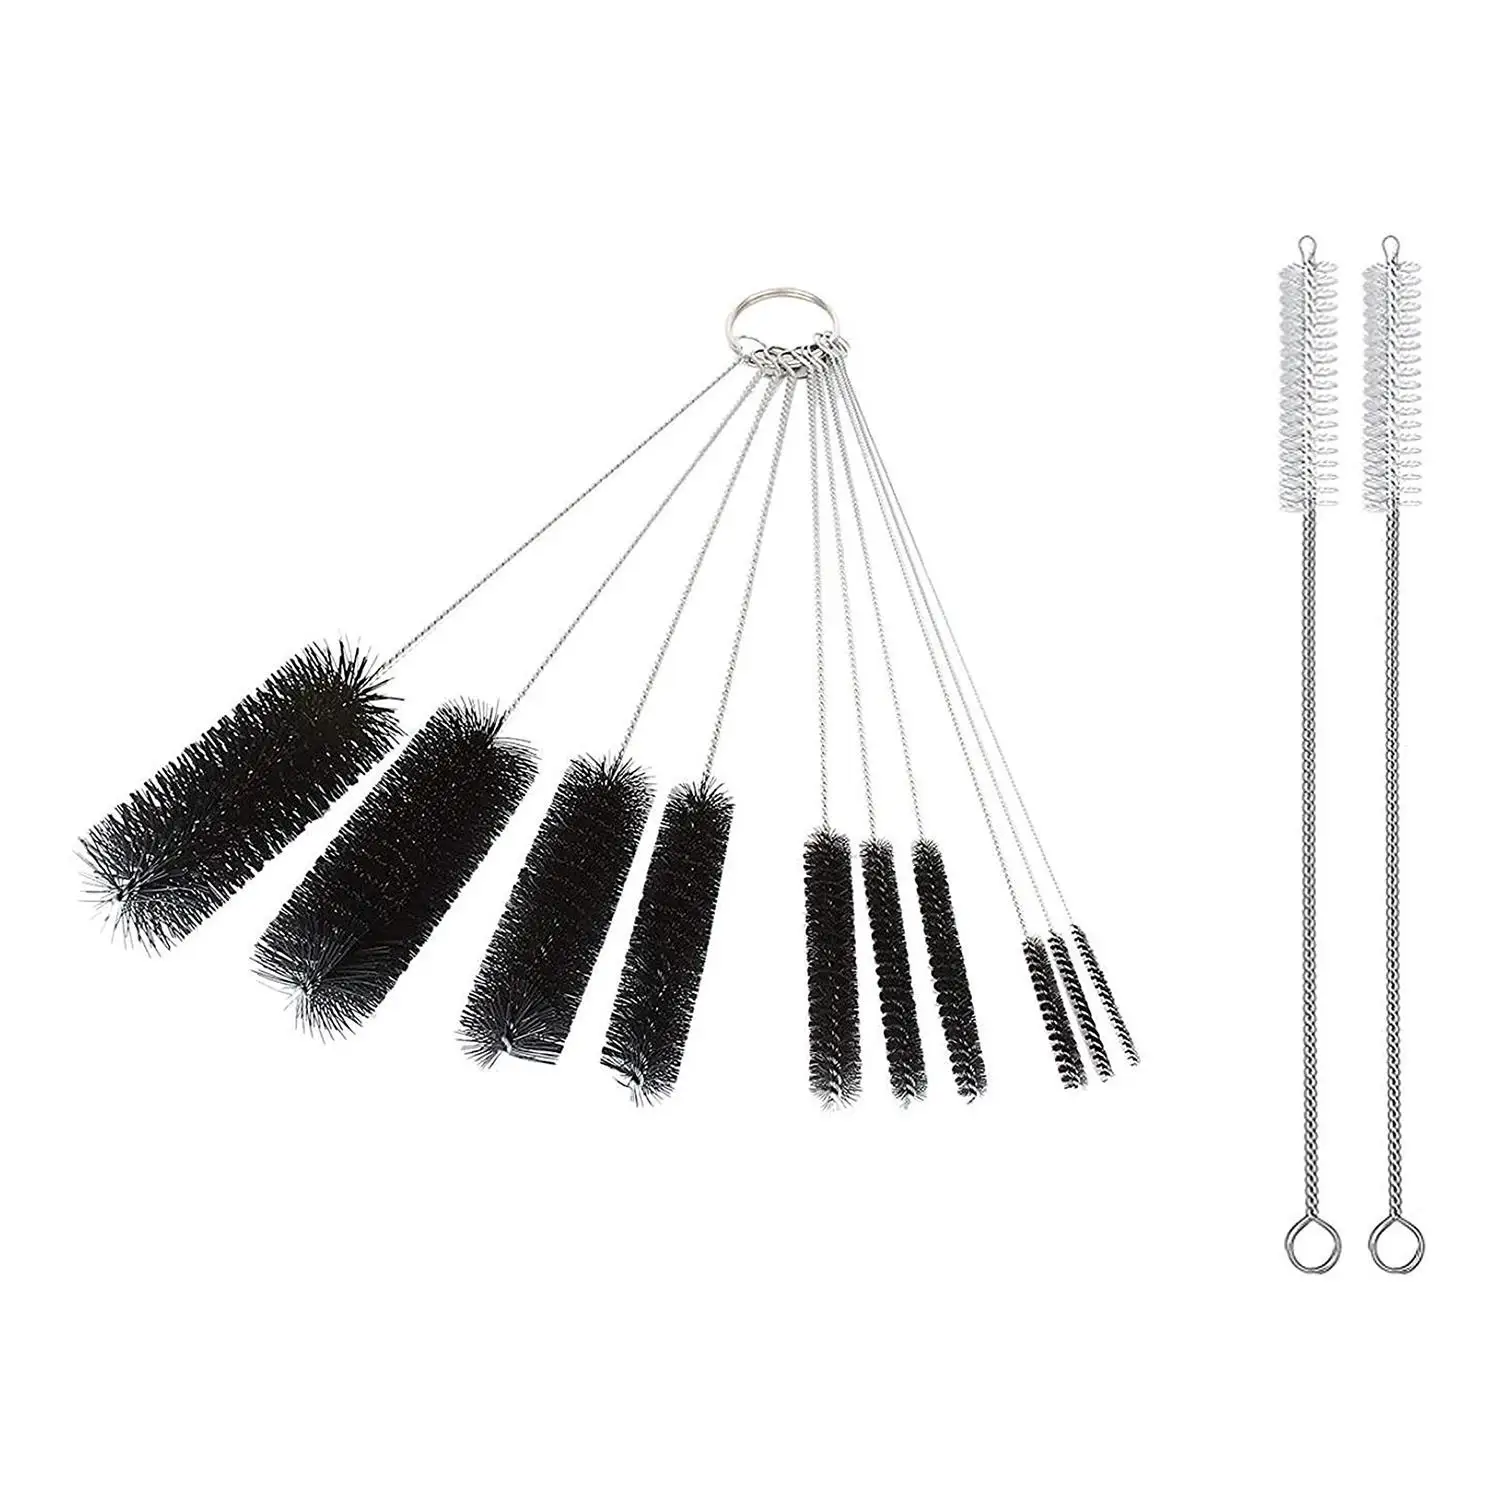 

Hot Sale Tube Brush Cleaner Set -Pipe Cleaning Brushes Tube Brushes Tube Bottle Straw Washing, Hummingbird Feeders